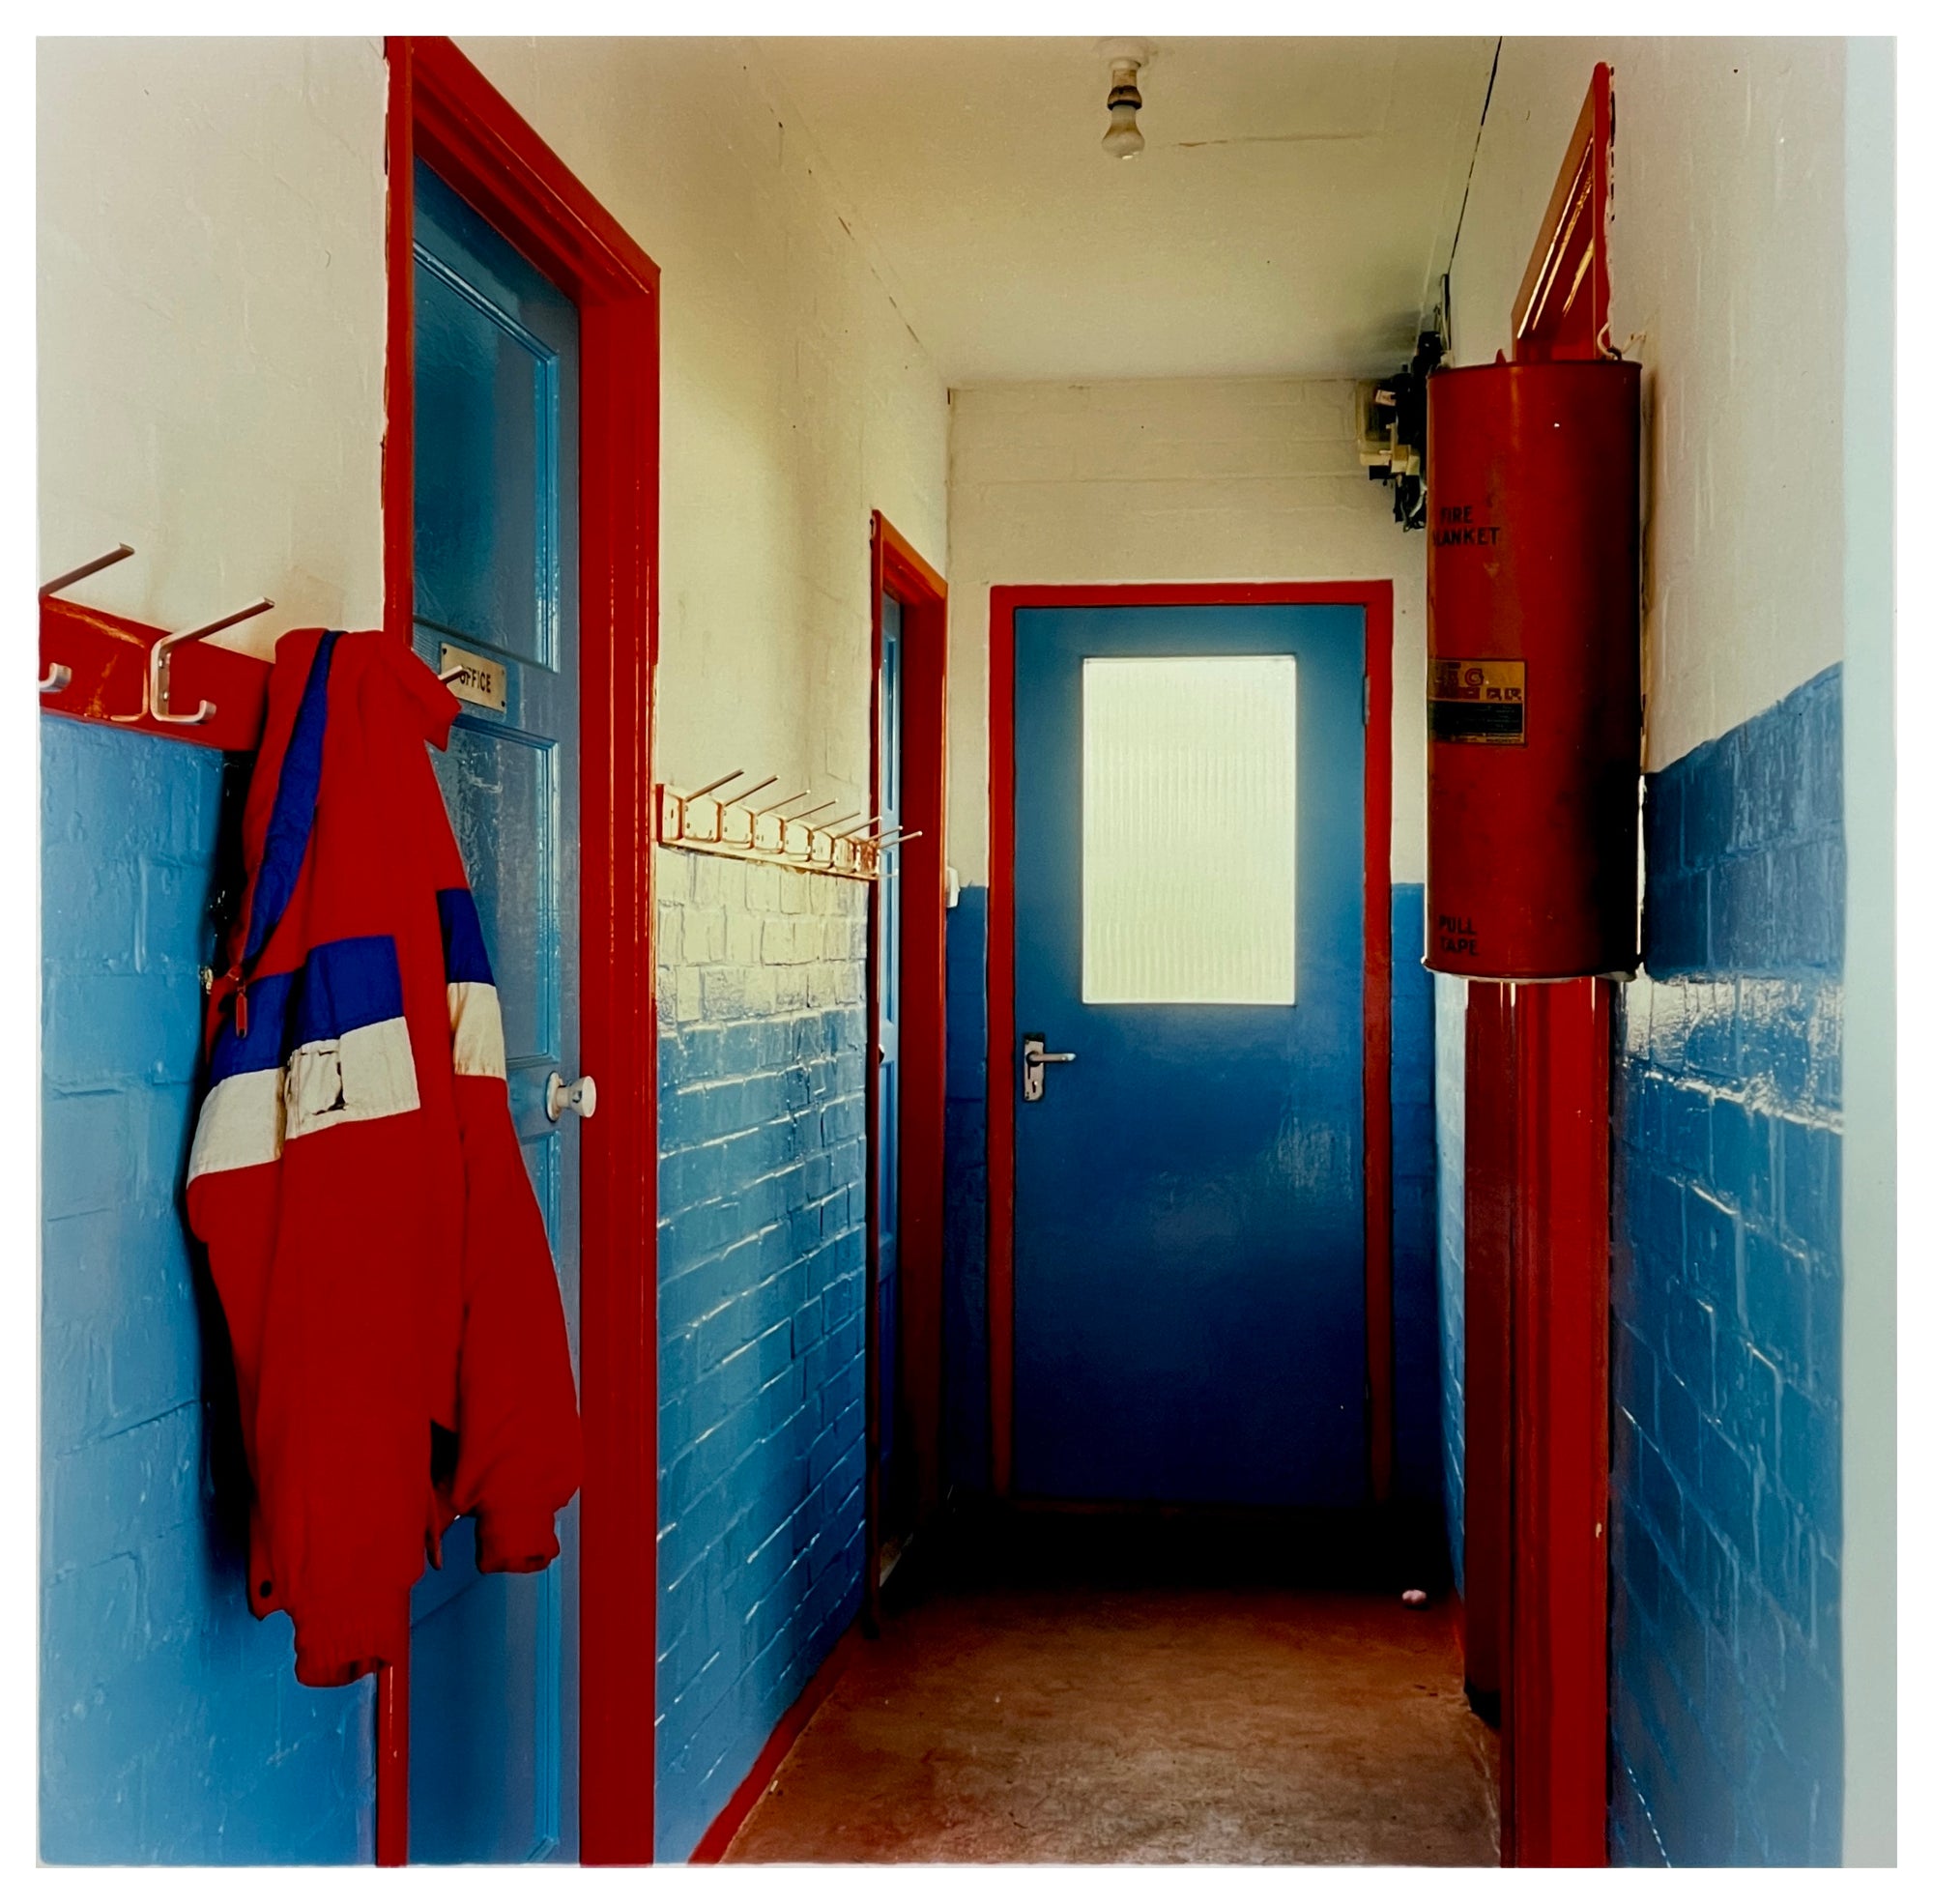 Photograph by Richard Heeps.  A hallway in a scouts hut with painted walls, the top half of the walls are painted cream and the bottom are painted blue.  There are two blue painted doors which have a red door frame.  There are red painted coat hooks on the left hand side on the wall on which is hanging a jacket made up of nearly identical red and blue colours.